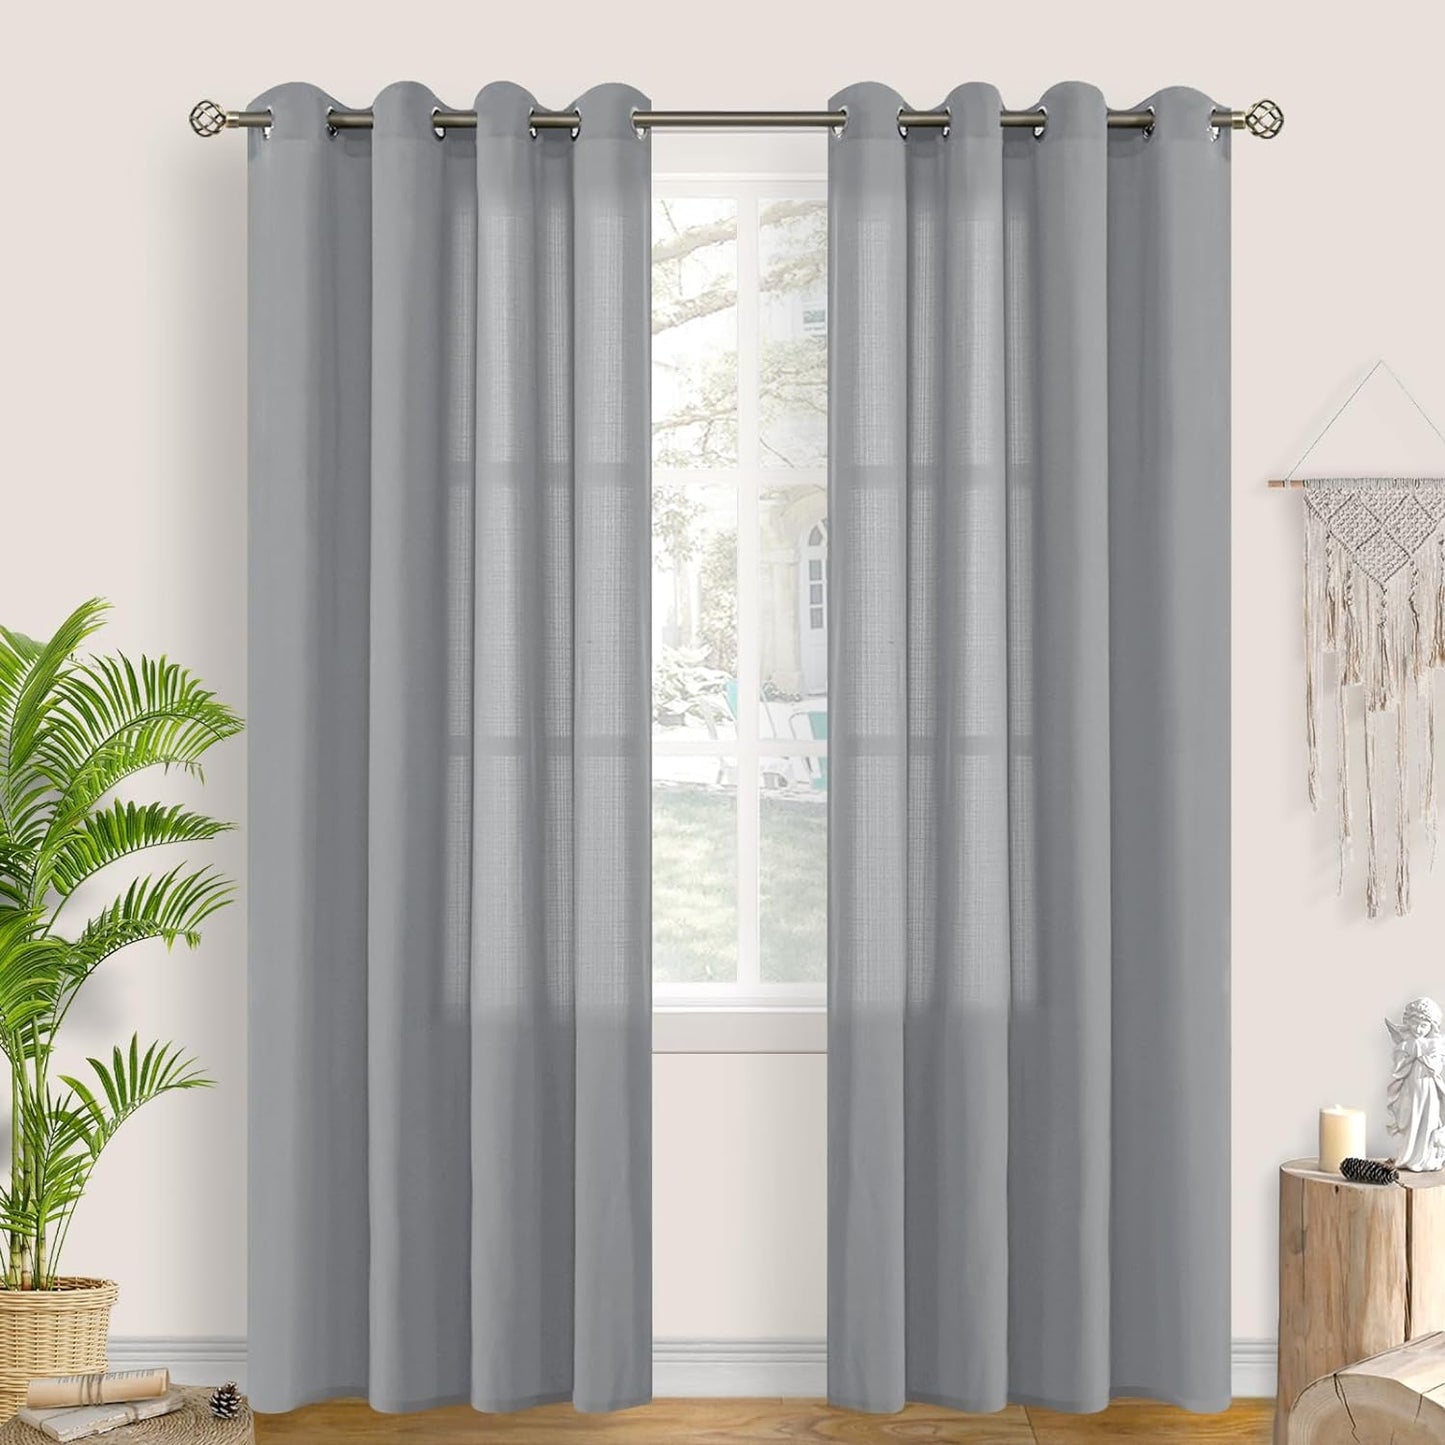 Bgment Natural Linen Look Semi Sheer Curtains for Bedroom, 52 X 54 Inch White Grommet Light Filtering Casual Textured Privacy Curtains for Bay Window, 2 Panels  BGment Grey 52W X 95L 